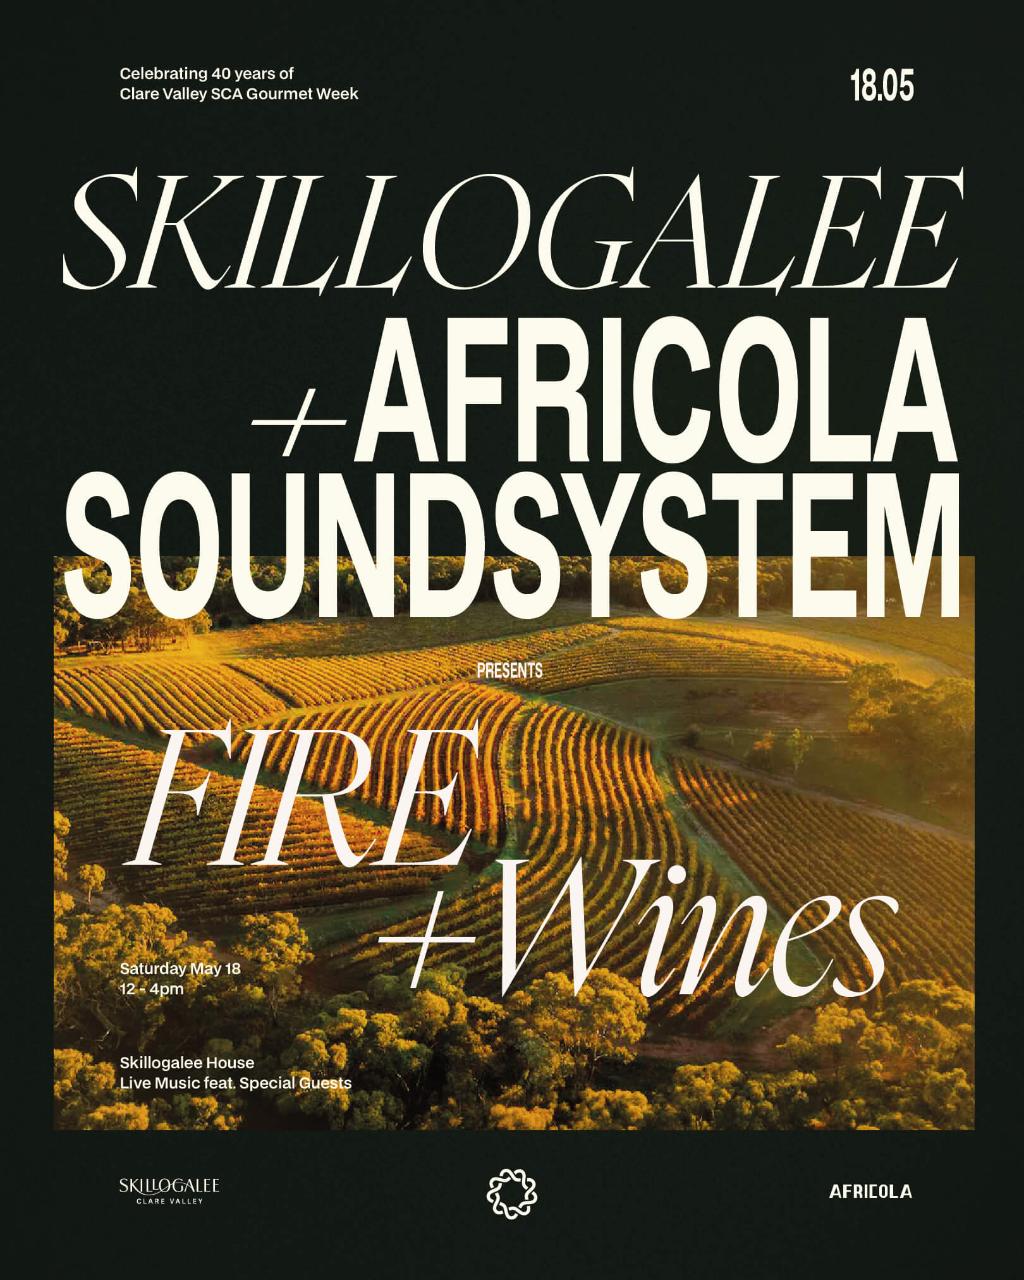 Skillogalee x Africola present... Fire + Wines